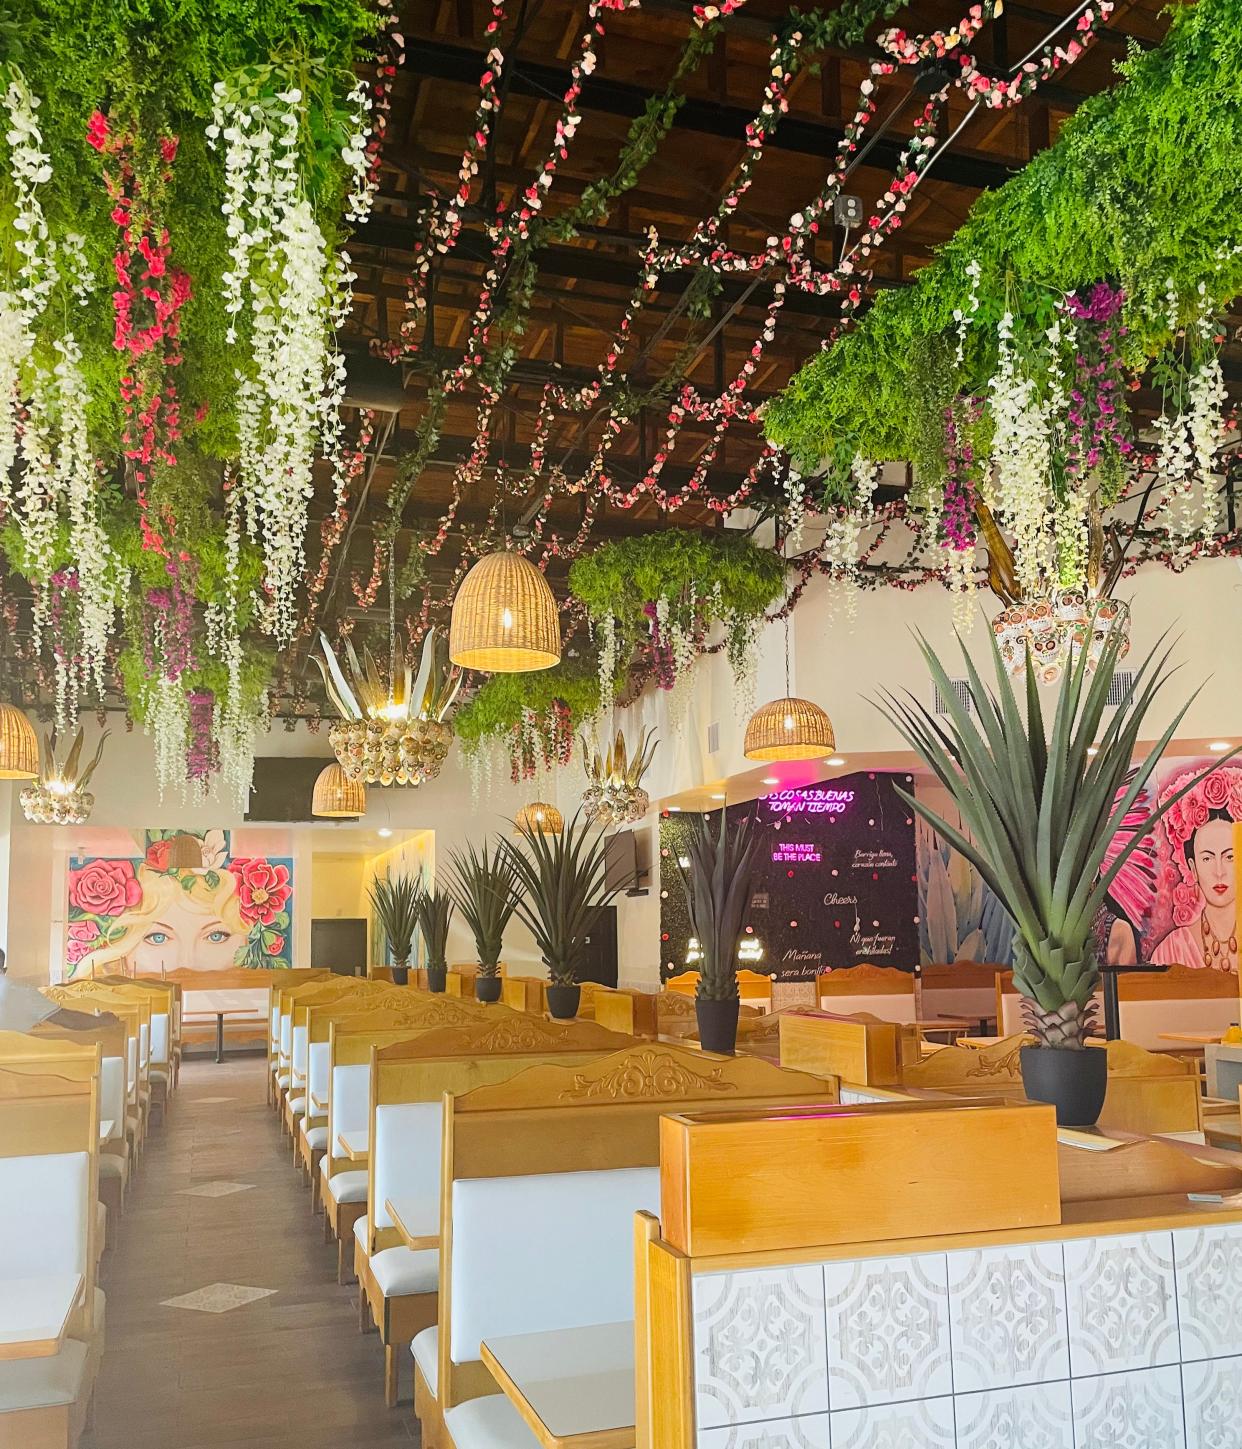 The interior of family-owned Don Eduardo Cocina Mexicana, which hopes to open by the end of October at 2665 Park St. at the intersection of King Street in Jacksonville's historic Riverside neighborhood.